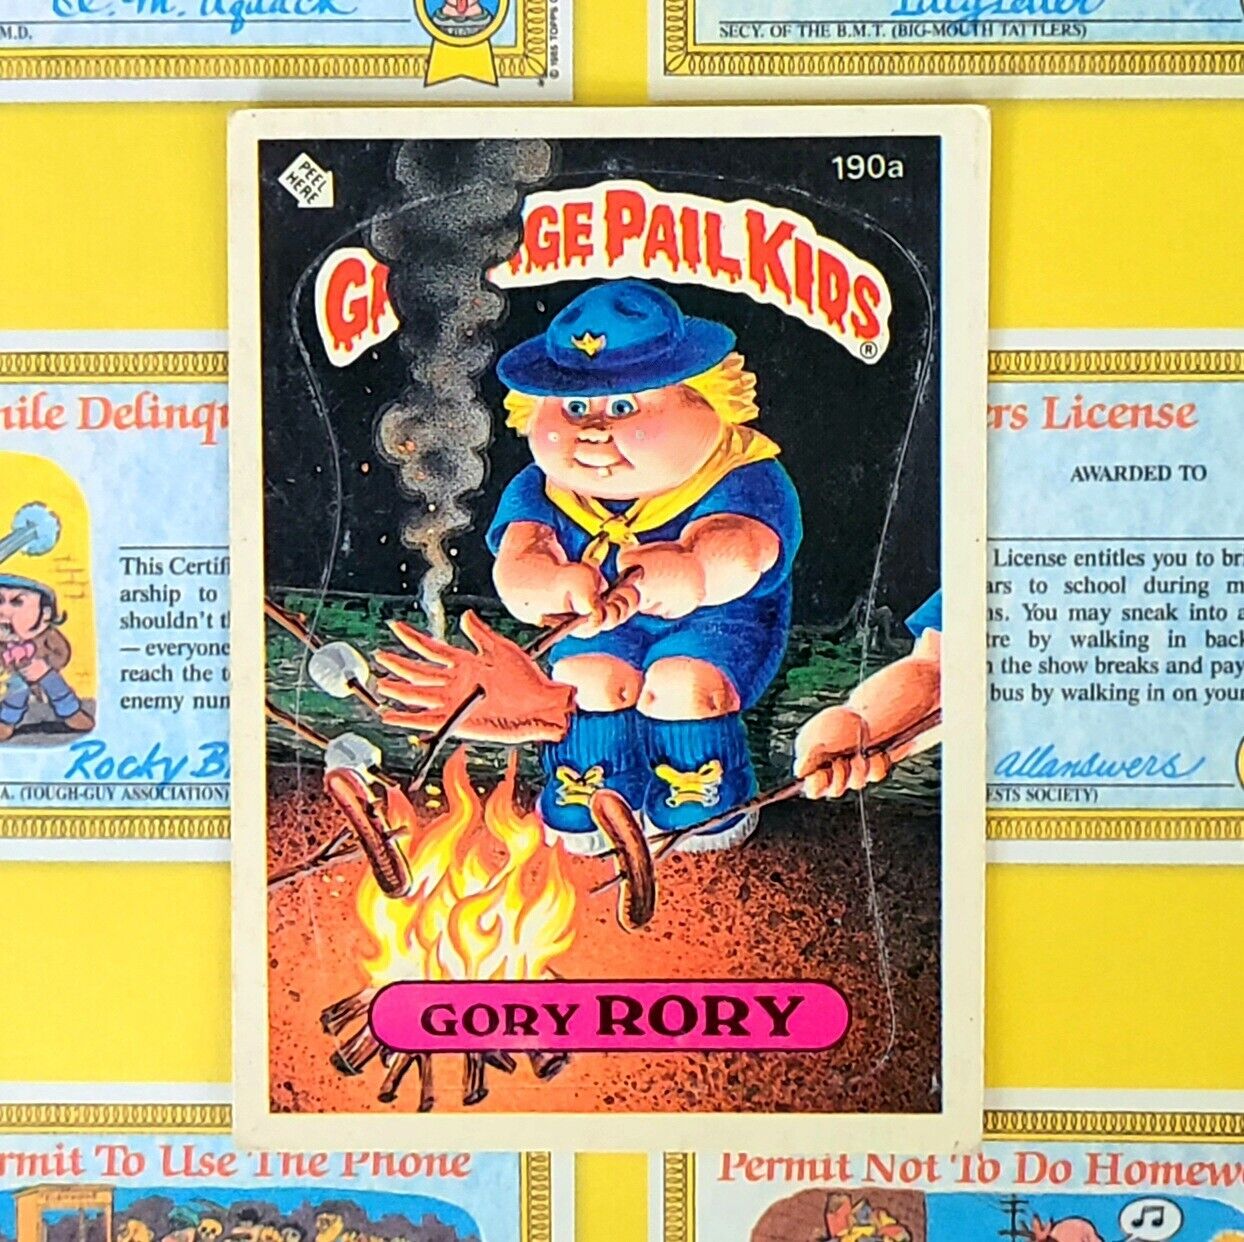 Topps 1986 Garbage Pail Kids 5th Series Gory Rory Card 190a